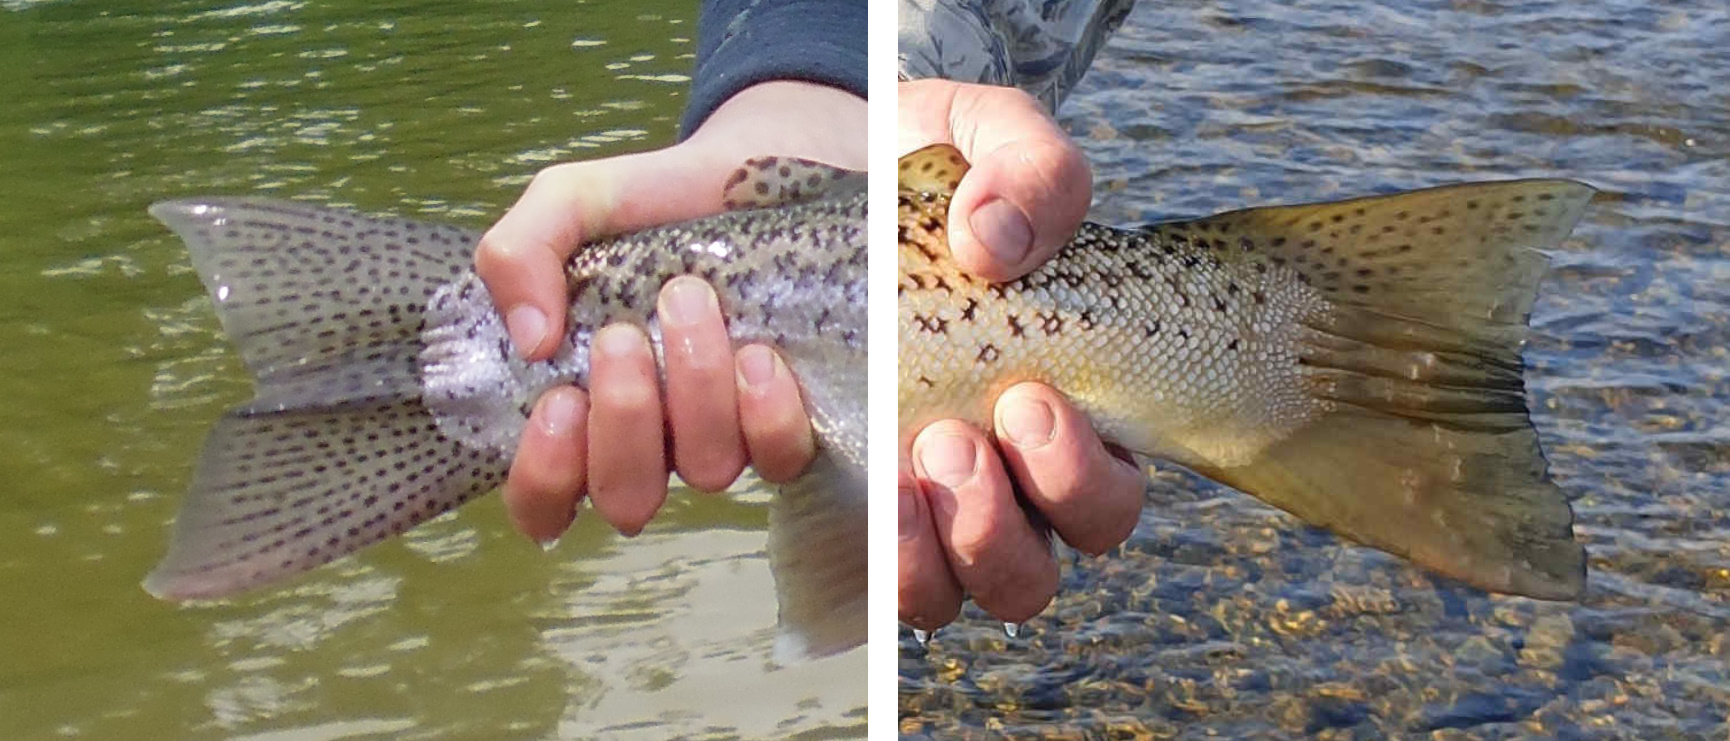 WFR1920.39fully spotted rainbow trout tail on left only partially spotted brown trout tail on right